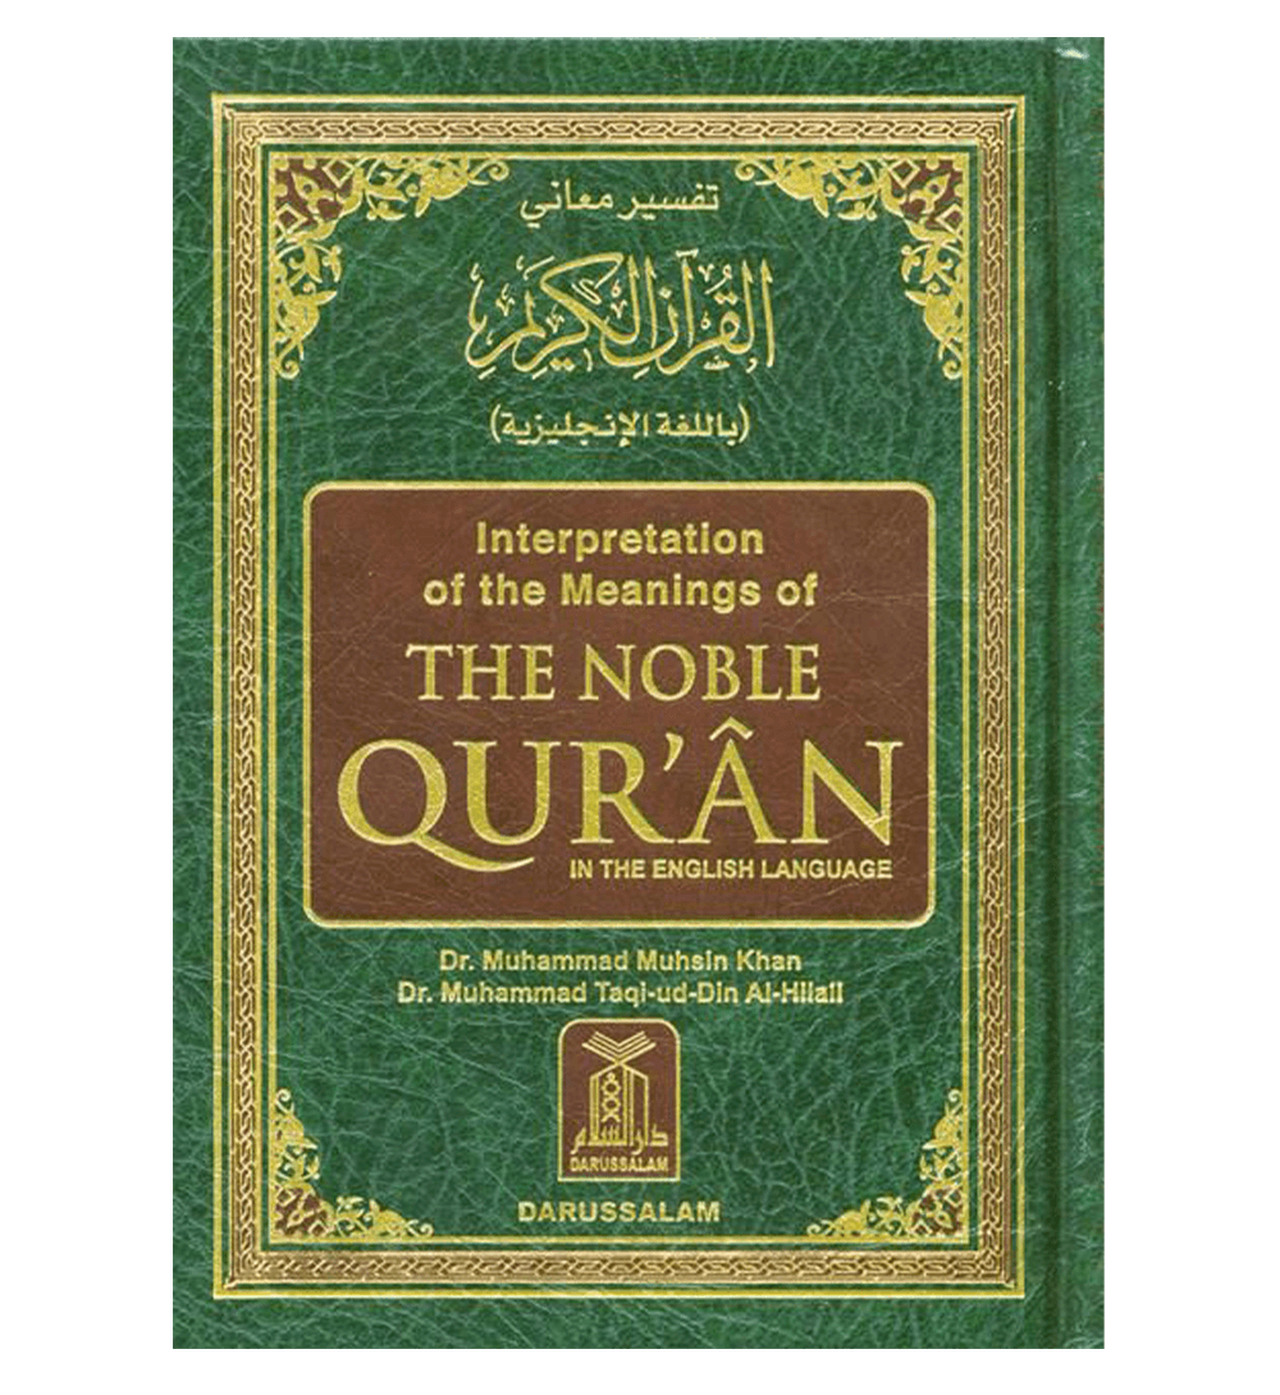 Interpretation Of The Meanings Of The Noble Qur'an In The English Language (5"x7")